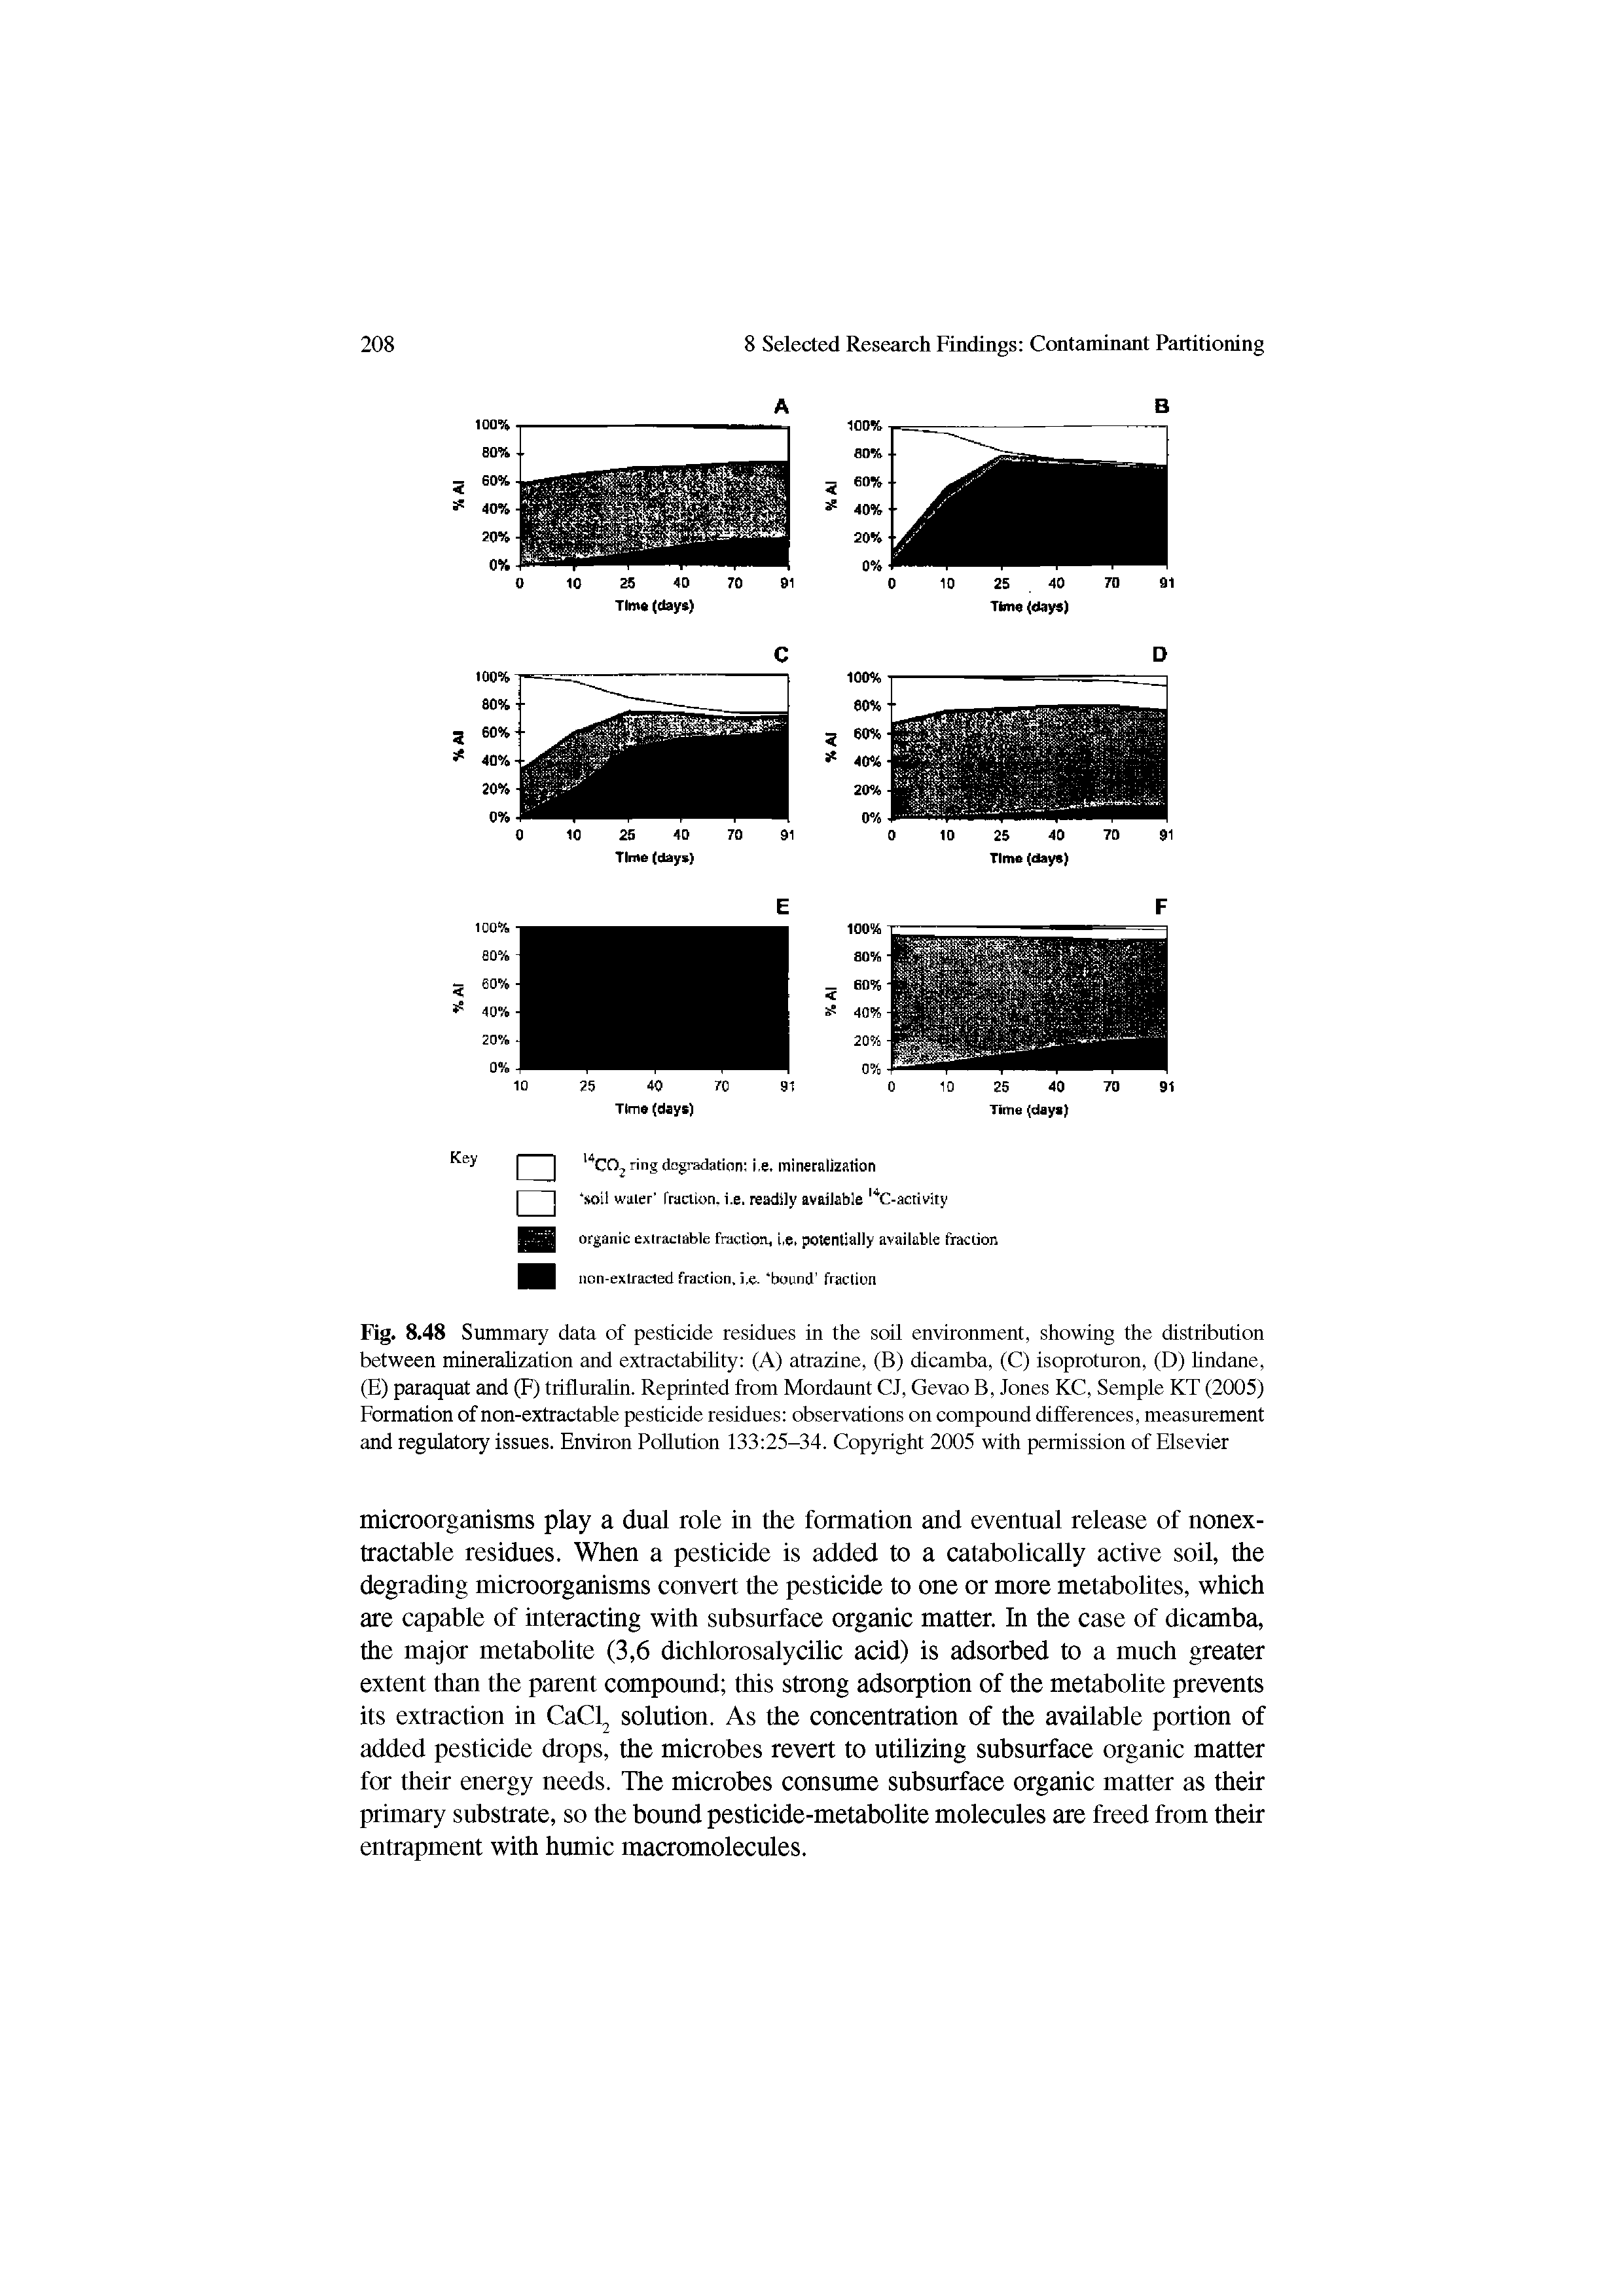 Fig. 8.48 Summary data of pesticide residues in the soil environment, sho wing the distribution between mineralization and extractabihty (A) atrazine, (B) dicamba, (C) isoproturon, (D) hndane, (E) paraquat and (F) tiifluralin. Reprinted from Mordaunt CJ, Gevao B, Jones KC, Semple KT (2005) Formation of non-extractable pesticide residues observations on compound differences, measurement and regulatory issues. Entiron Pollution 133 25-34. Copyright 2005 with permission of Elsevier...